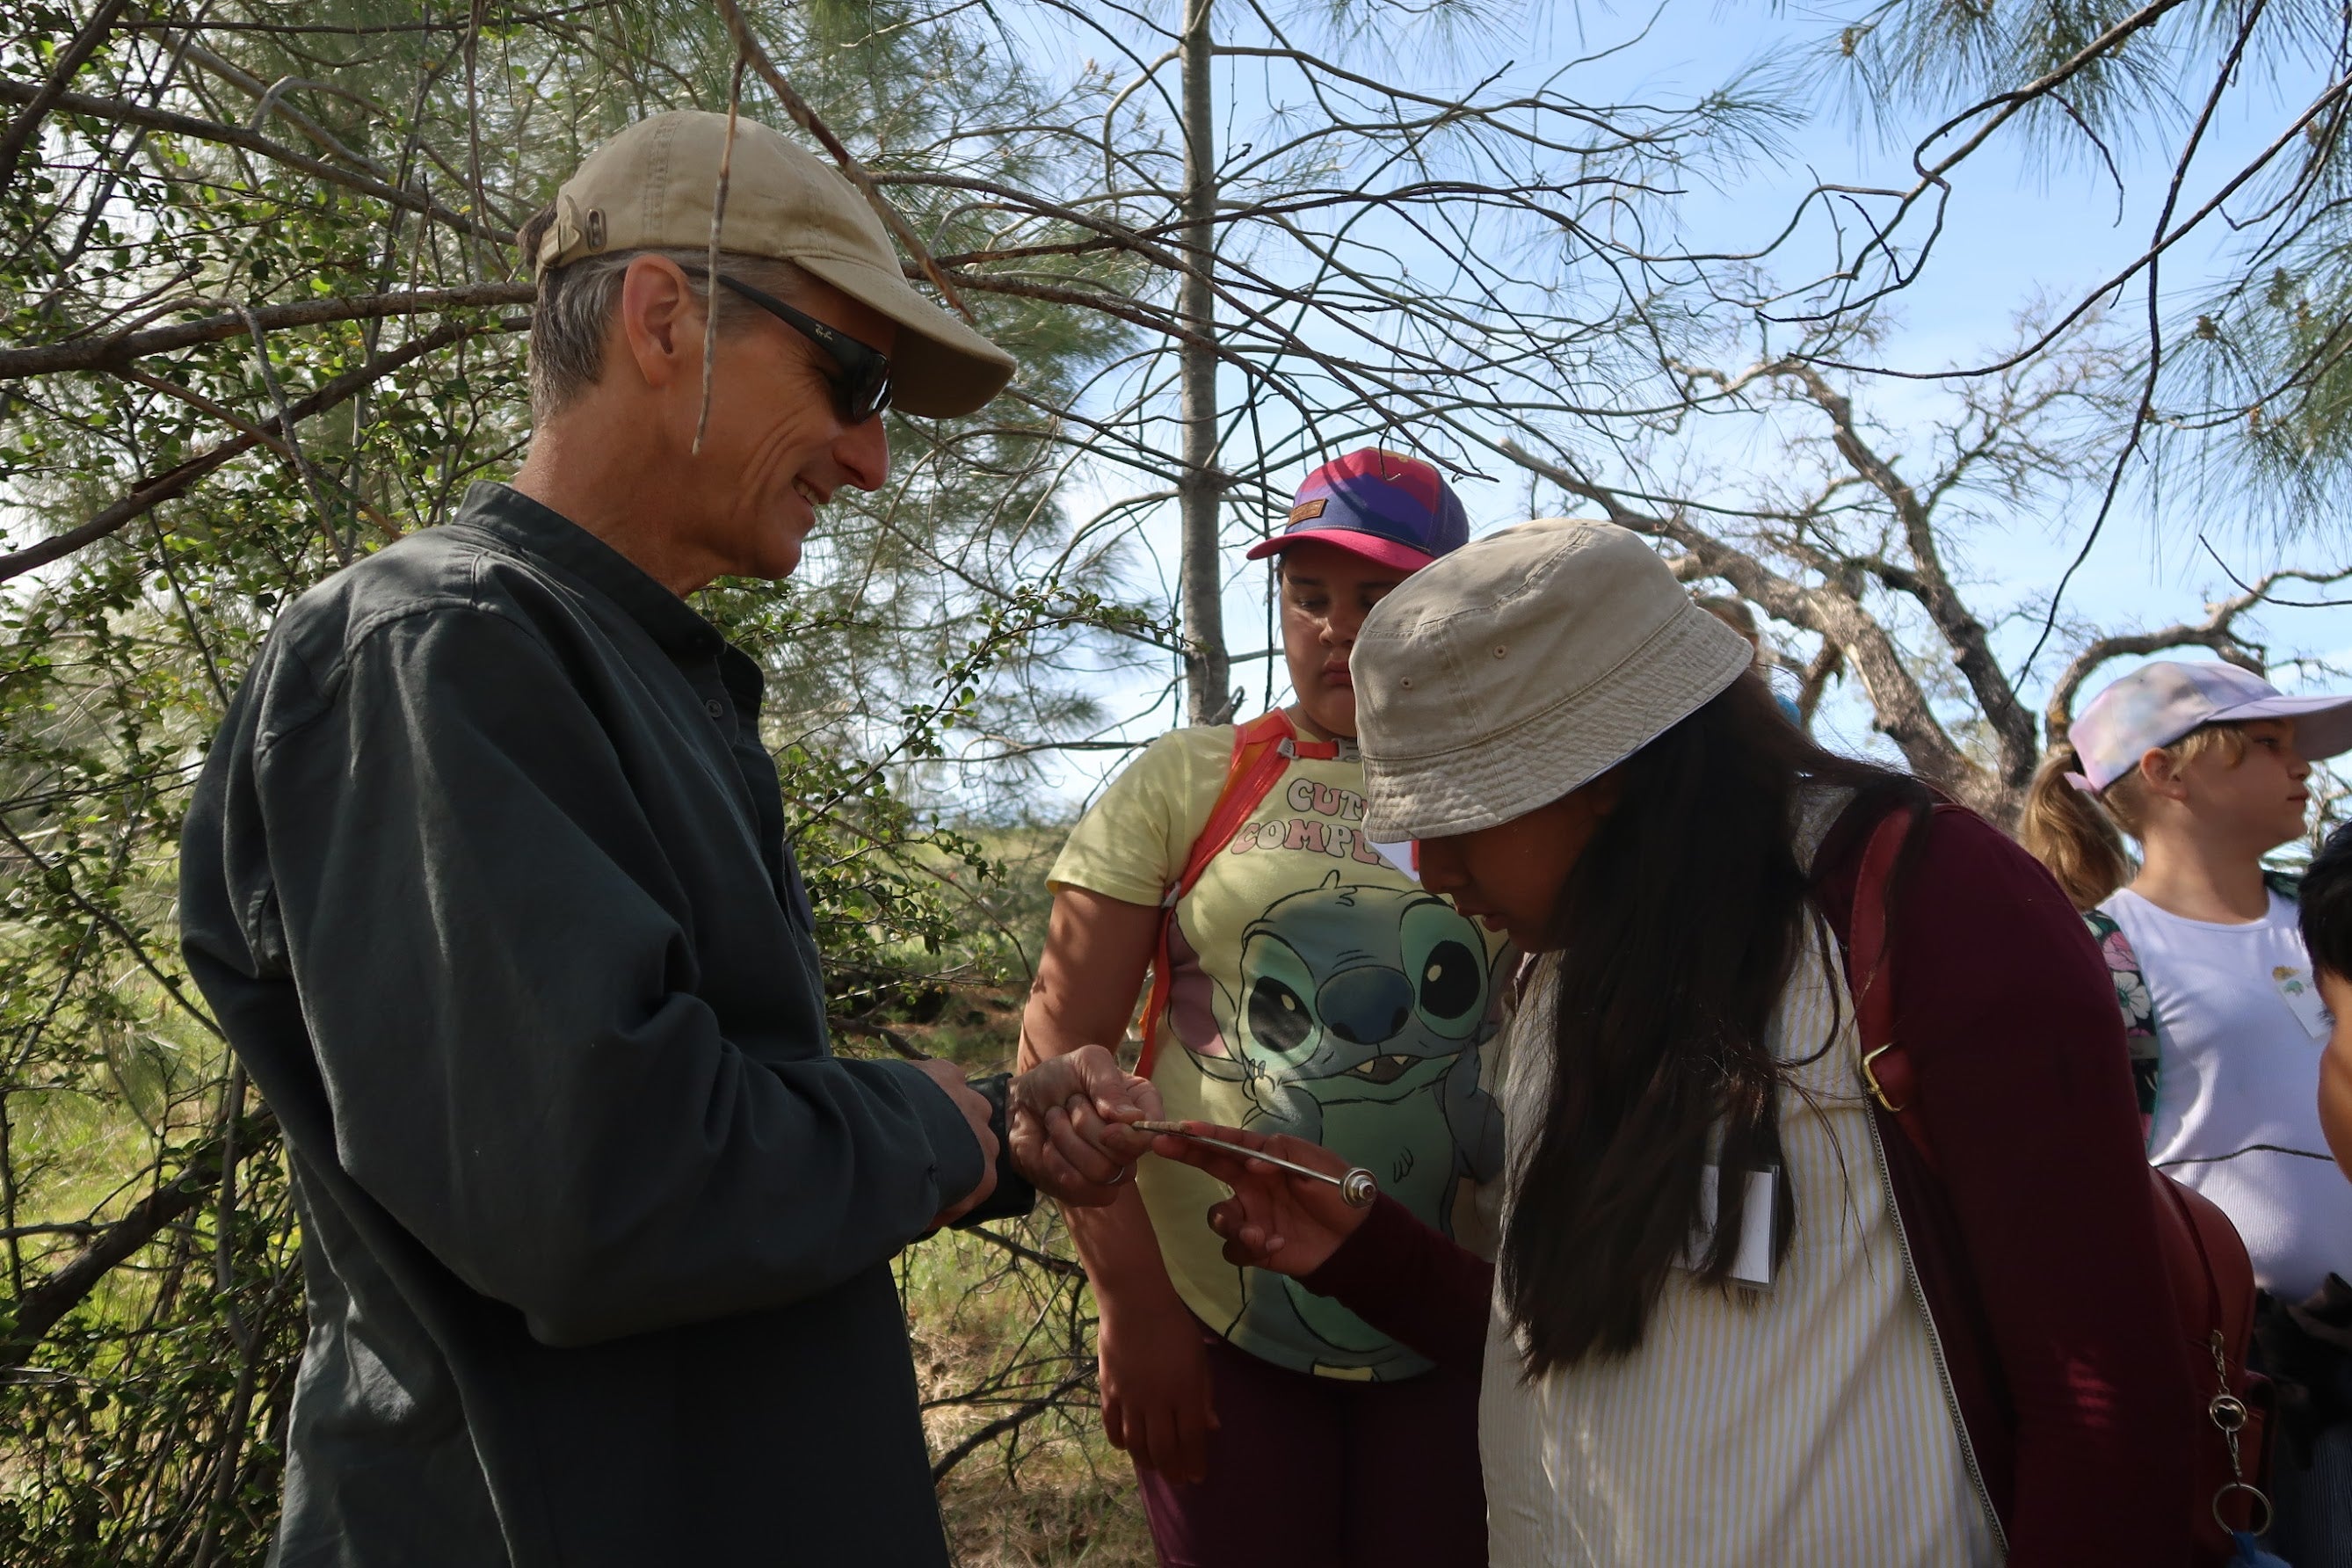 Andrew Latimer points to a recent tree core while students observe